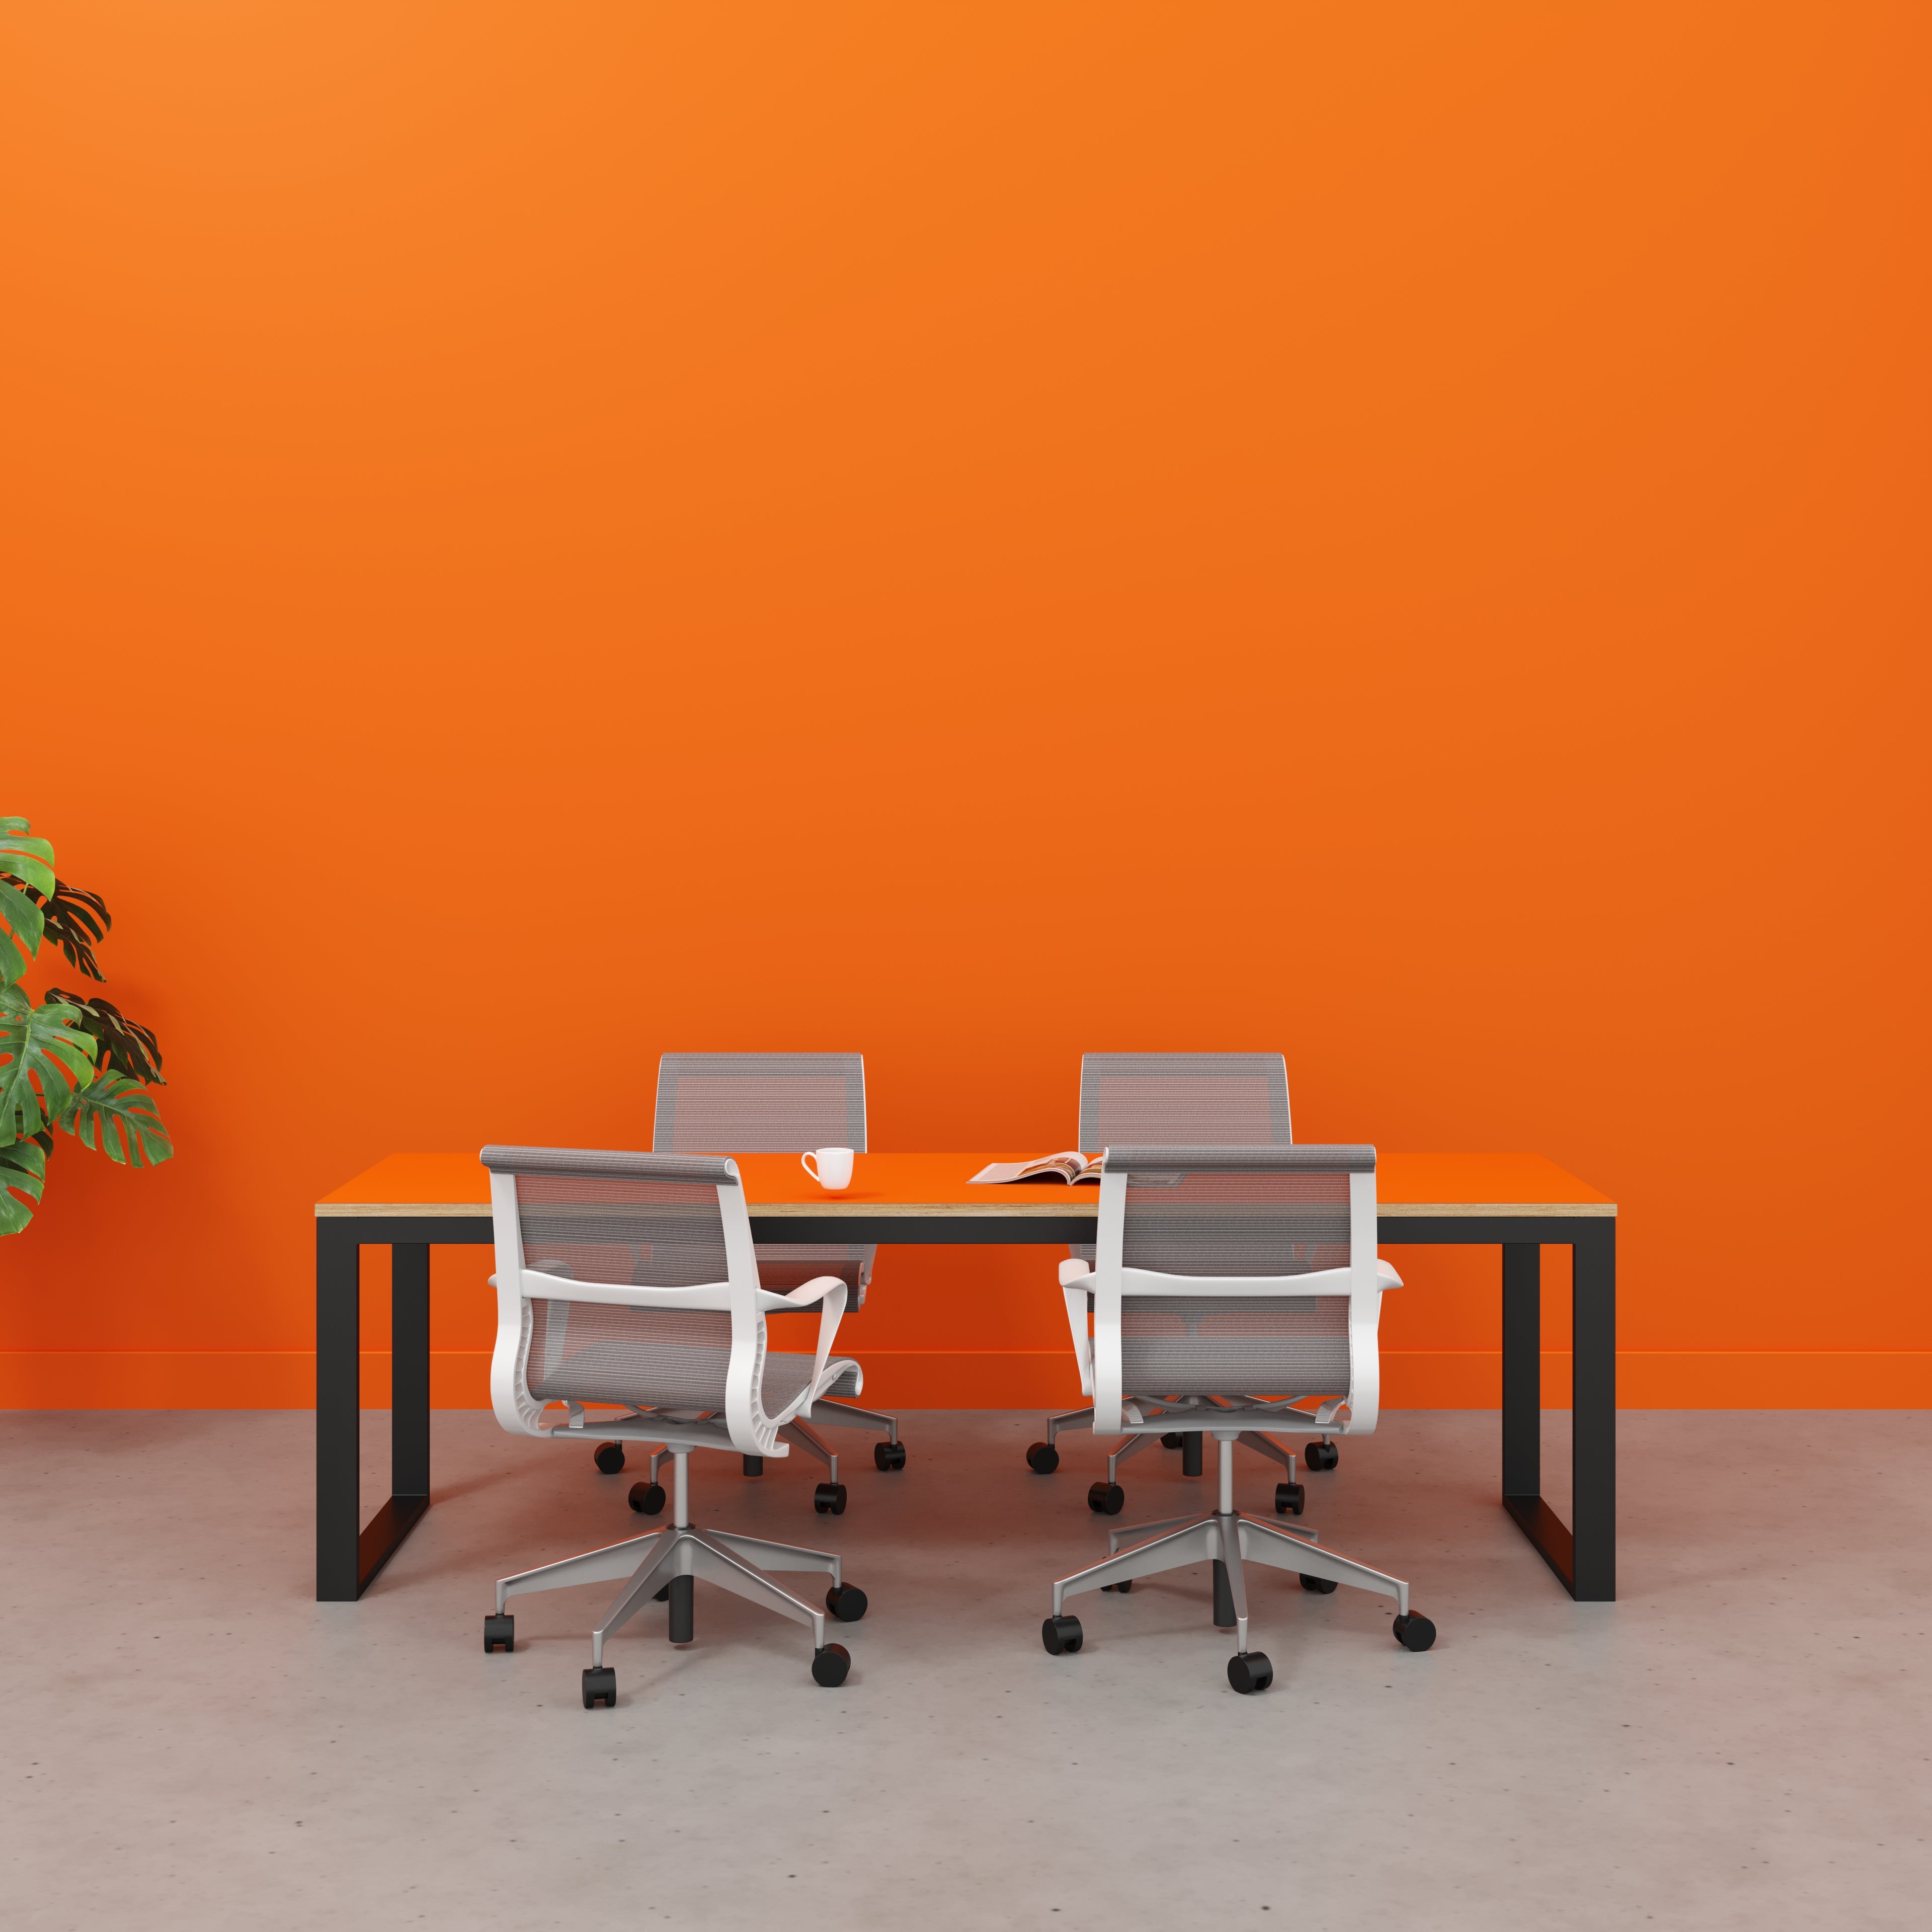 Table with Black Industrial Frame - Formica Levante Orange - 2400(w) x 745(d) x 735(h)